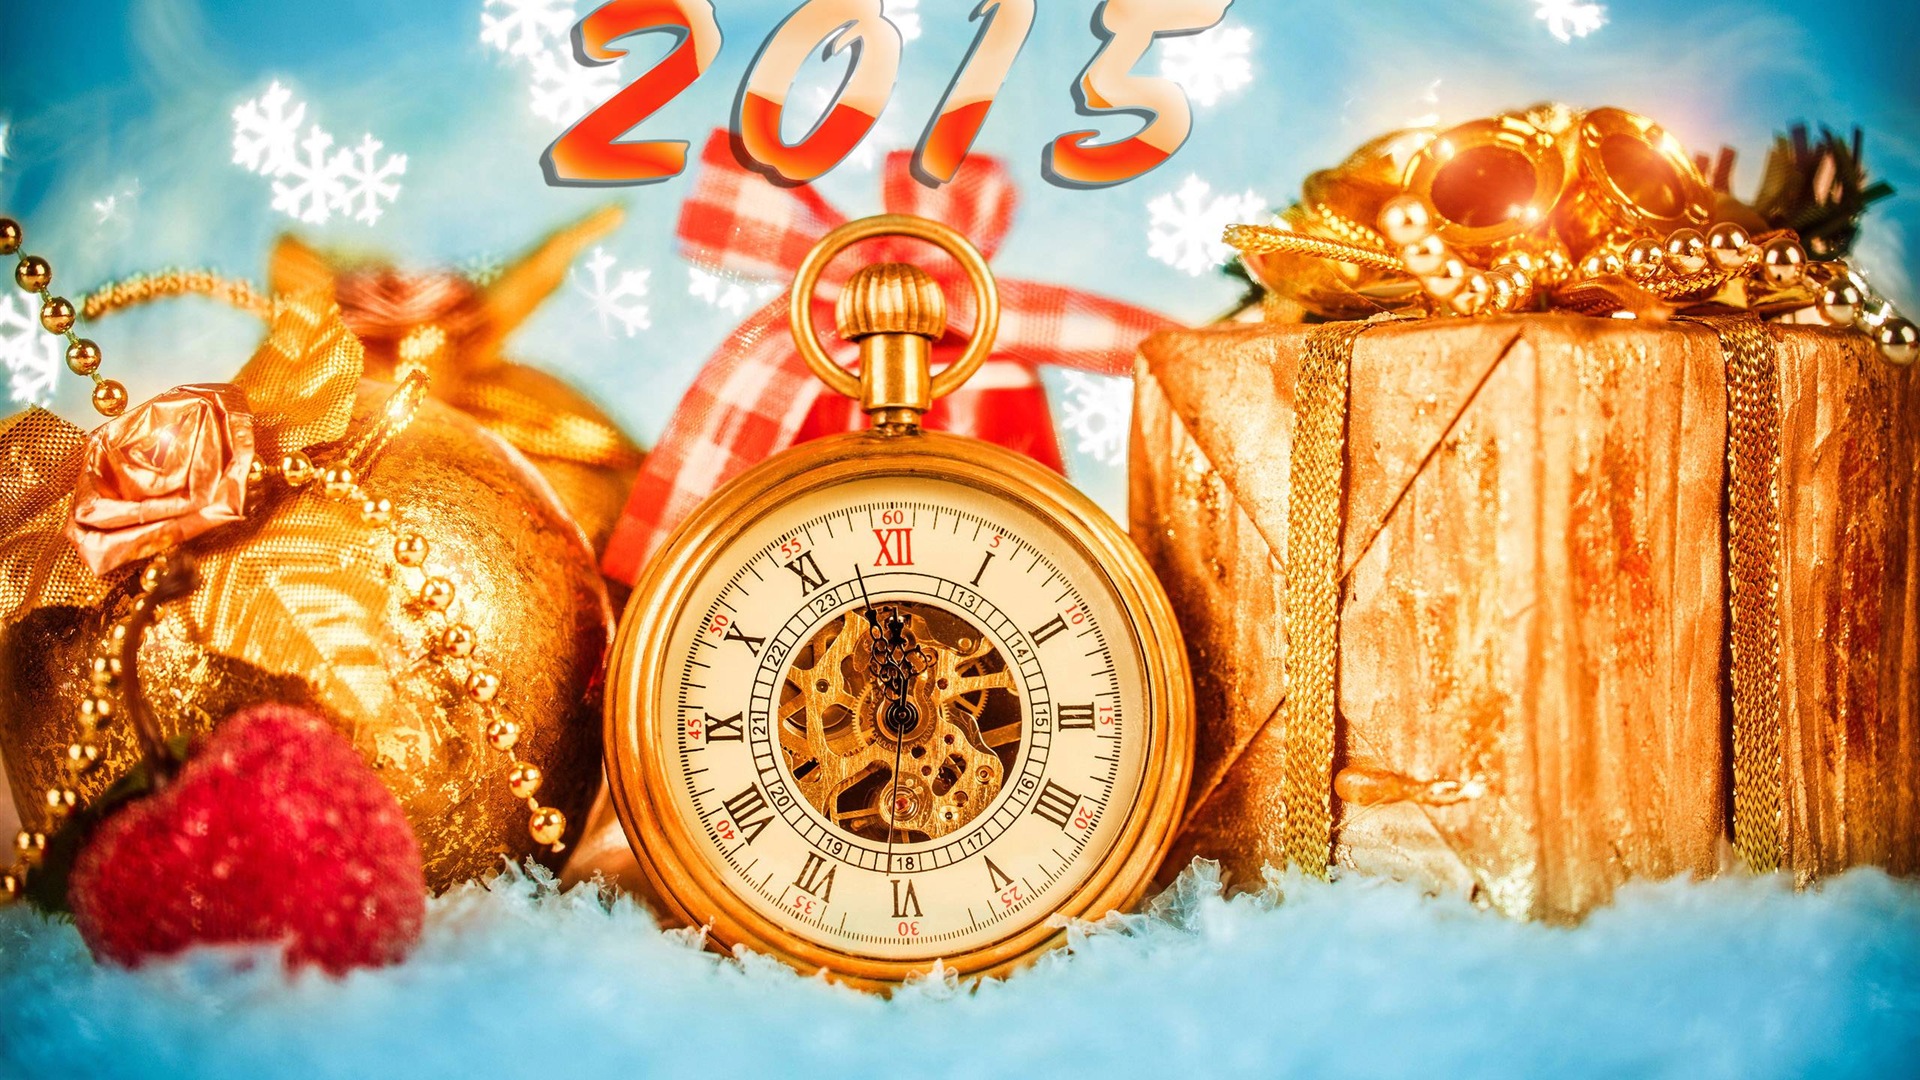 2015 New Year theme HD wallpapers (1) #7 - 1920x1080